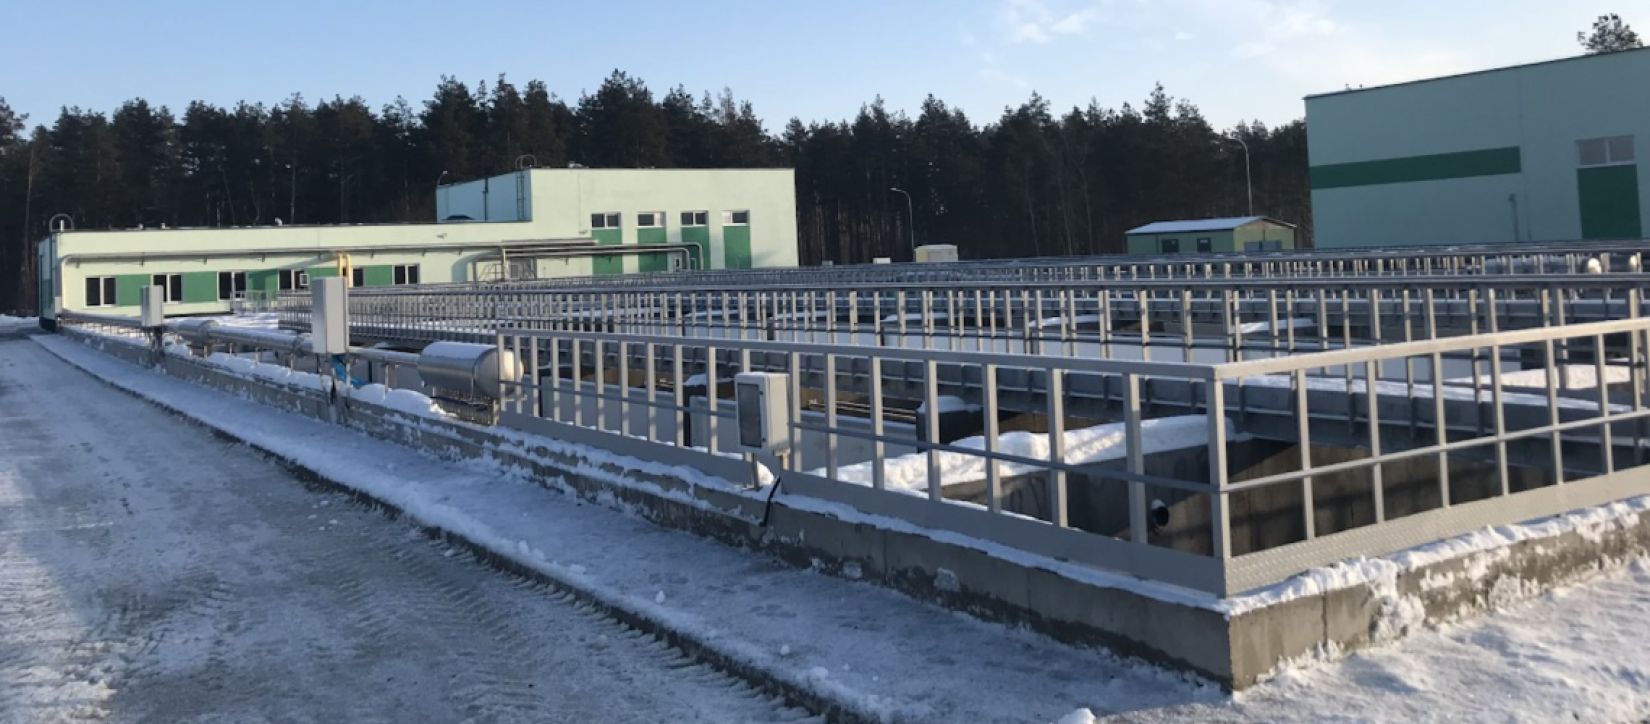 The World Bank project "Development of water supply and sanitation systems in the Republic of Belarus" aims to improve the quality, efficiency and reliability of water supply and wastewater treatment services